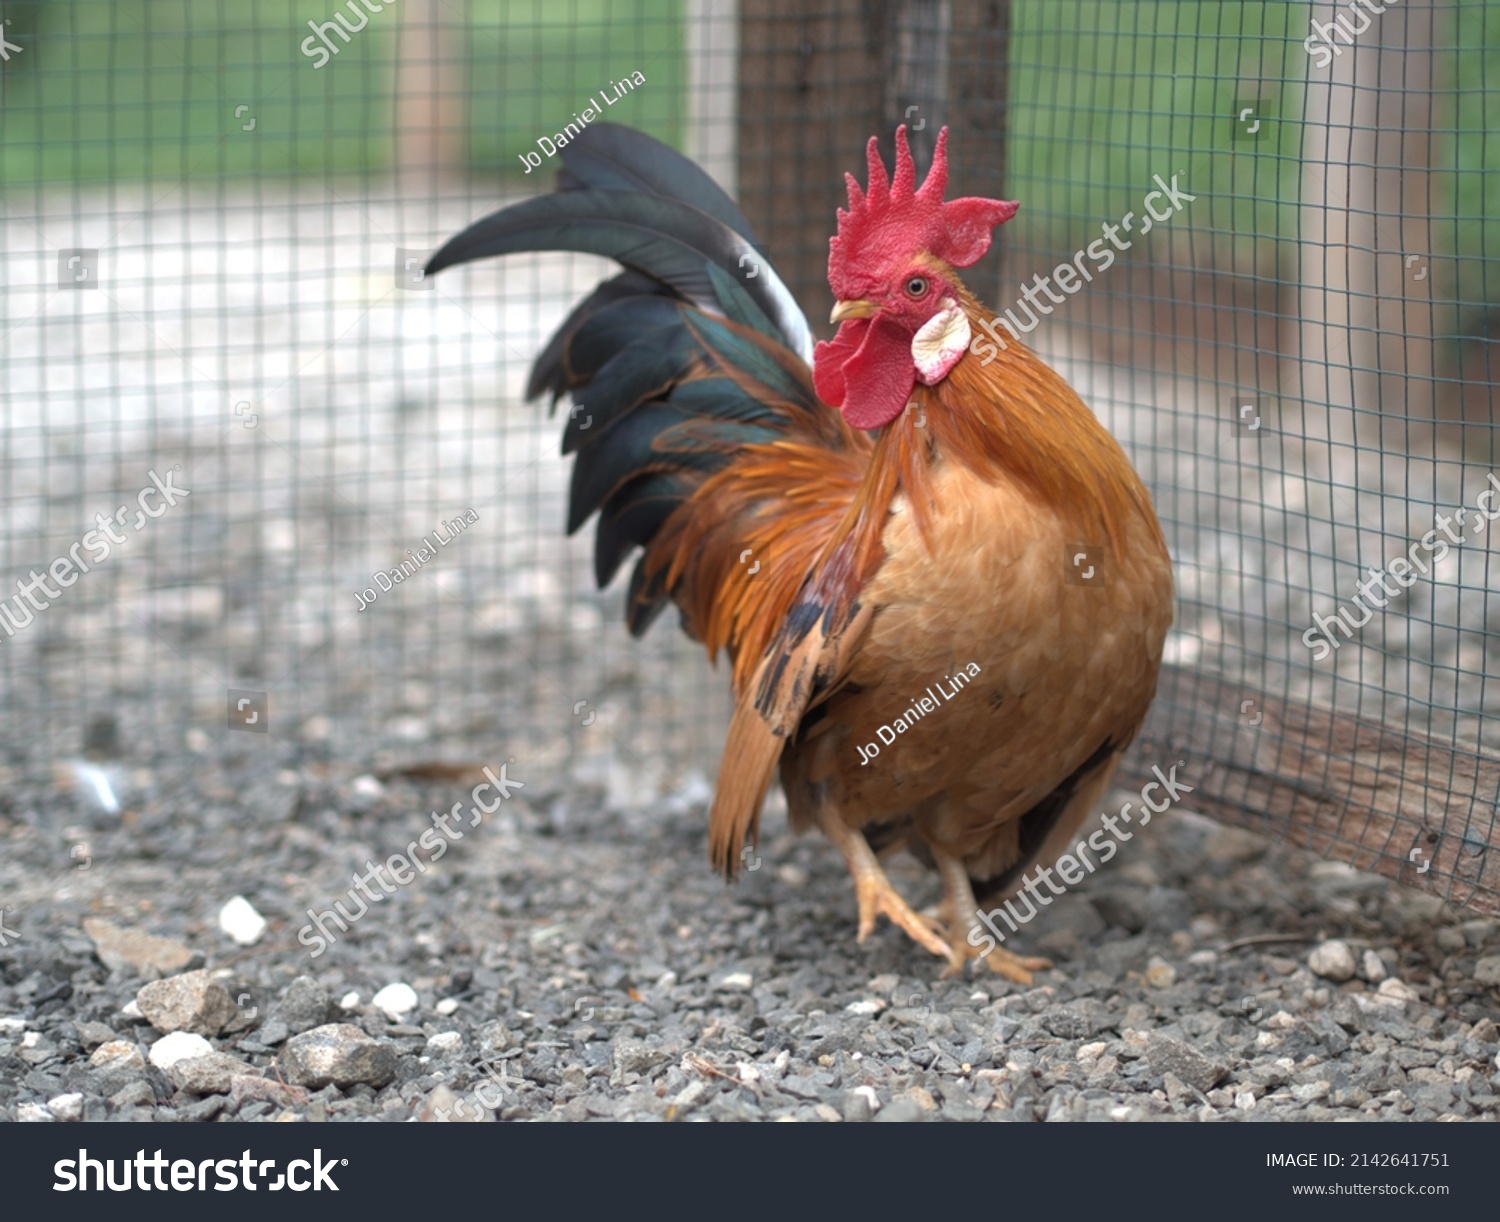 Rooster Chicken Beautiful Close Photos On Stock Photo 2142641751 ...